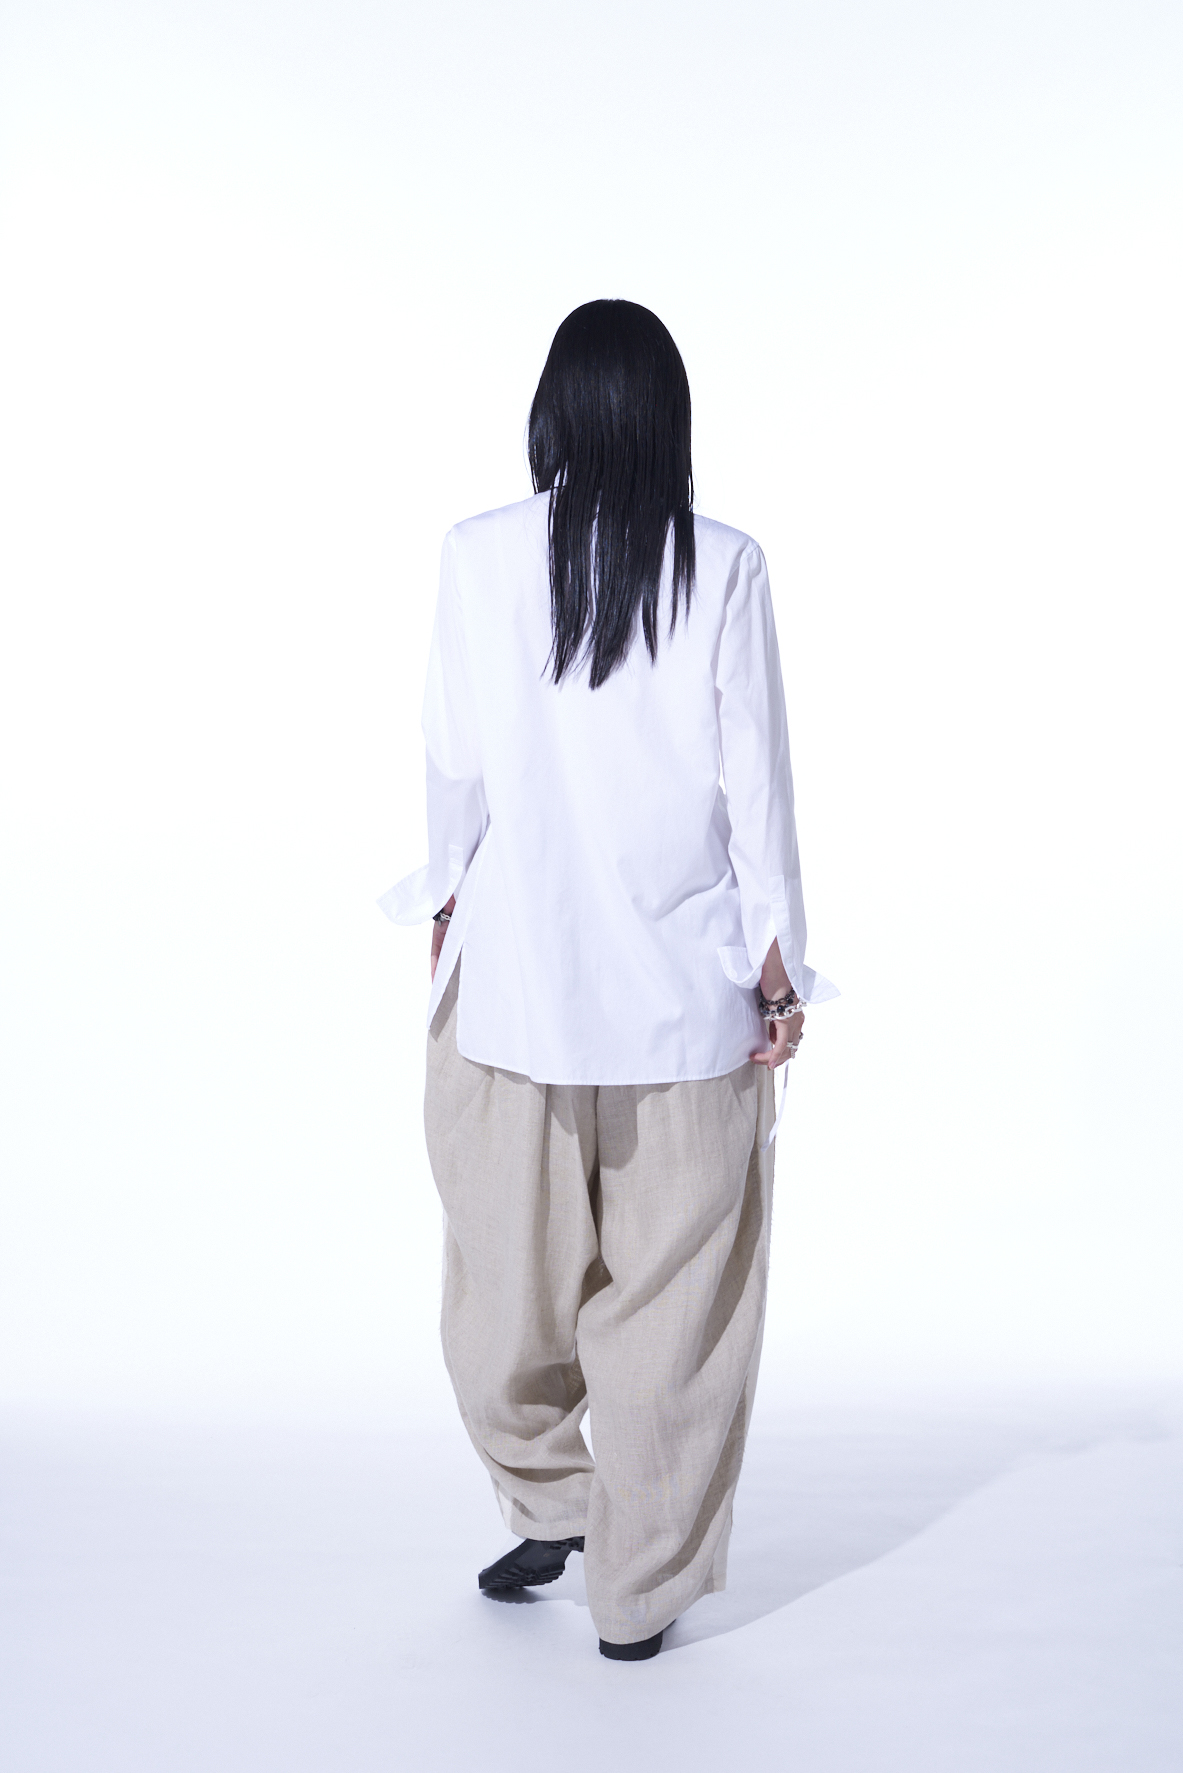 LINEN GAUZE DUAL FABRIC 12-PLEATED PANTS WITH SIDE TAPE